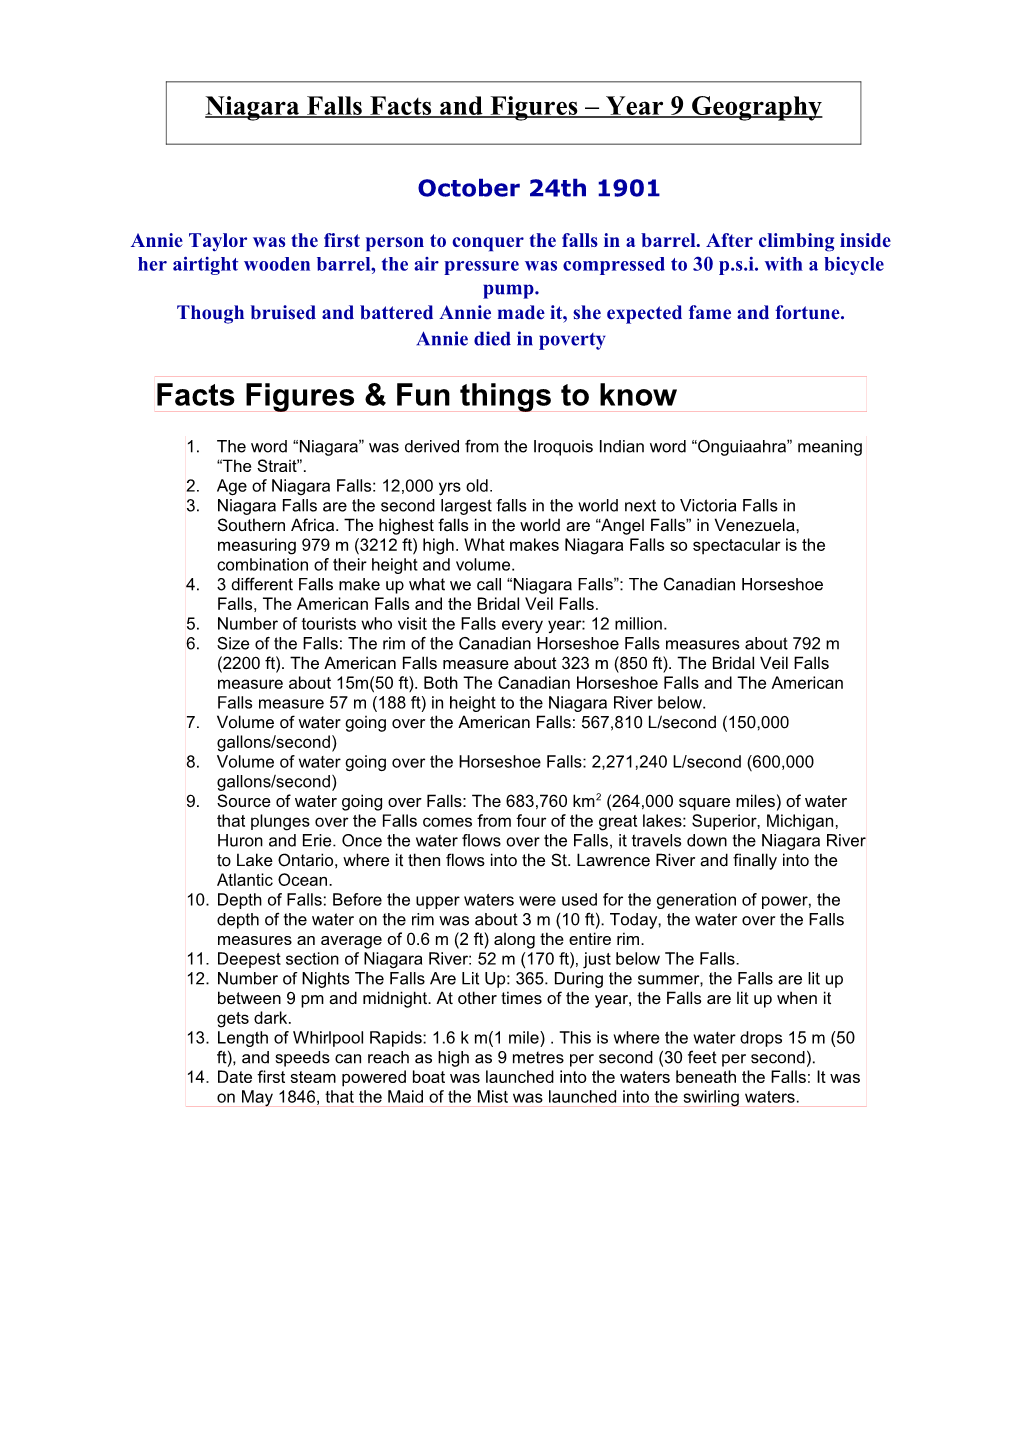 Facts Figures & Fun Things to Know